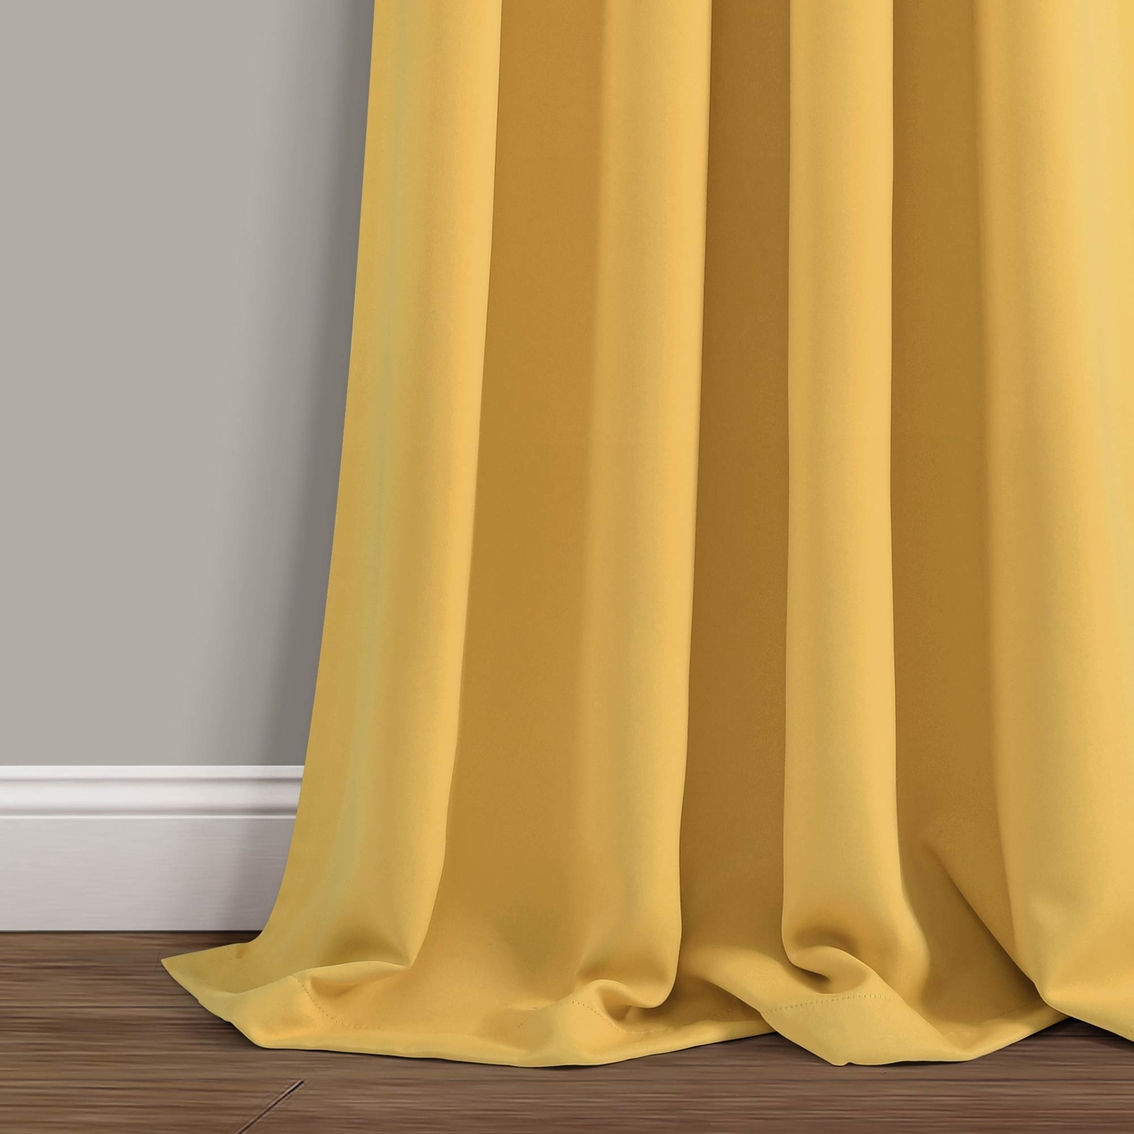 Lush Decor Dolores Insulated Grommet Blackout Curtains 52 x 95 in. 2 pc. Set - Image 3 of 8